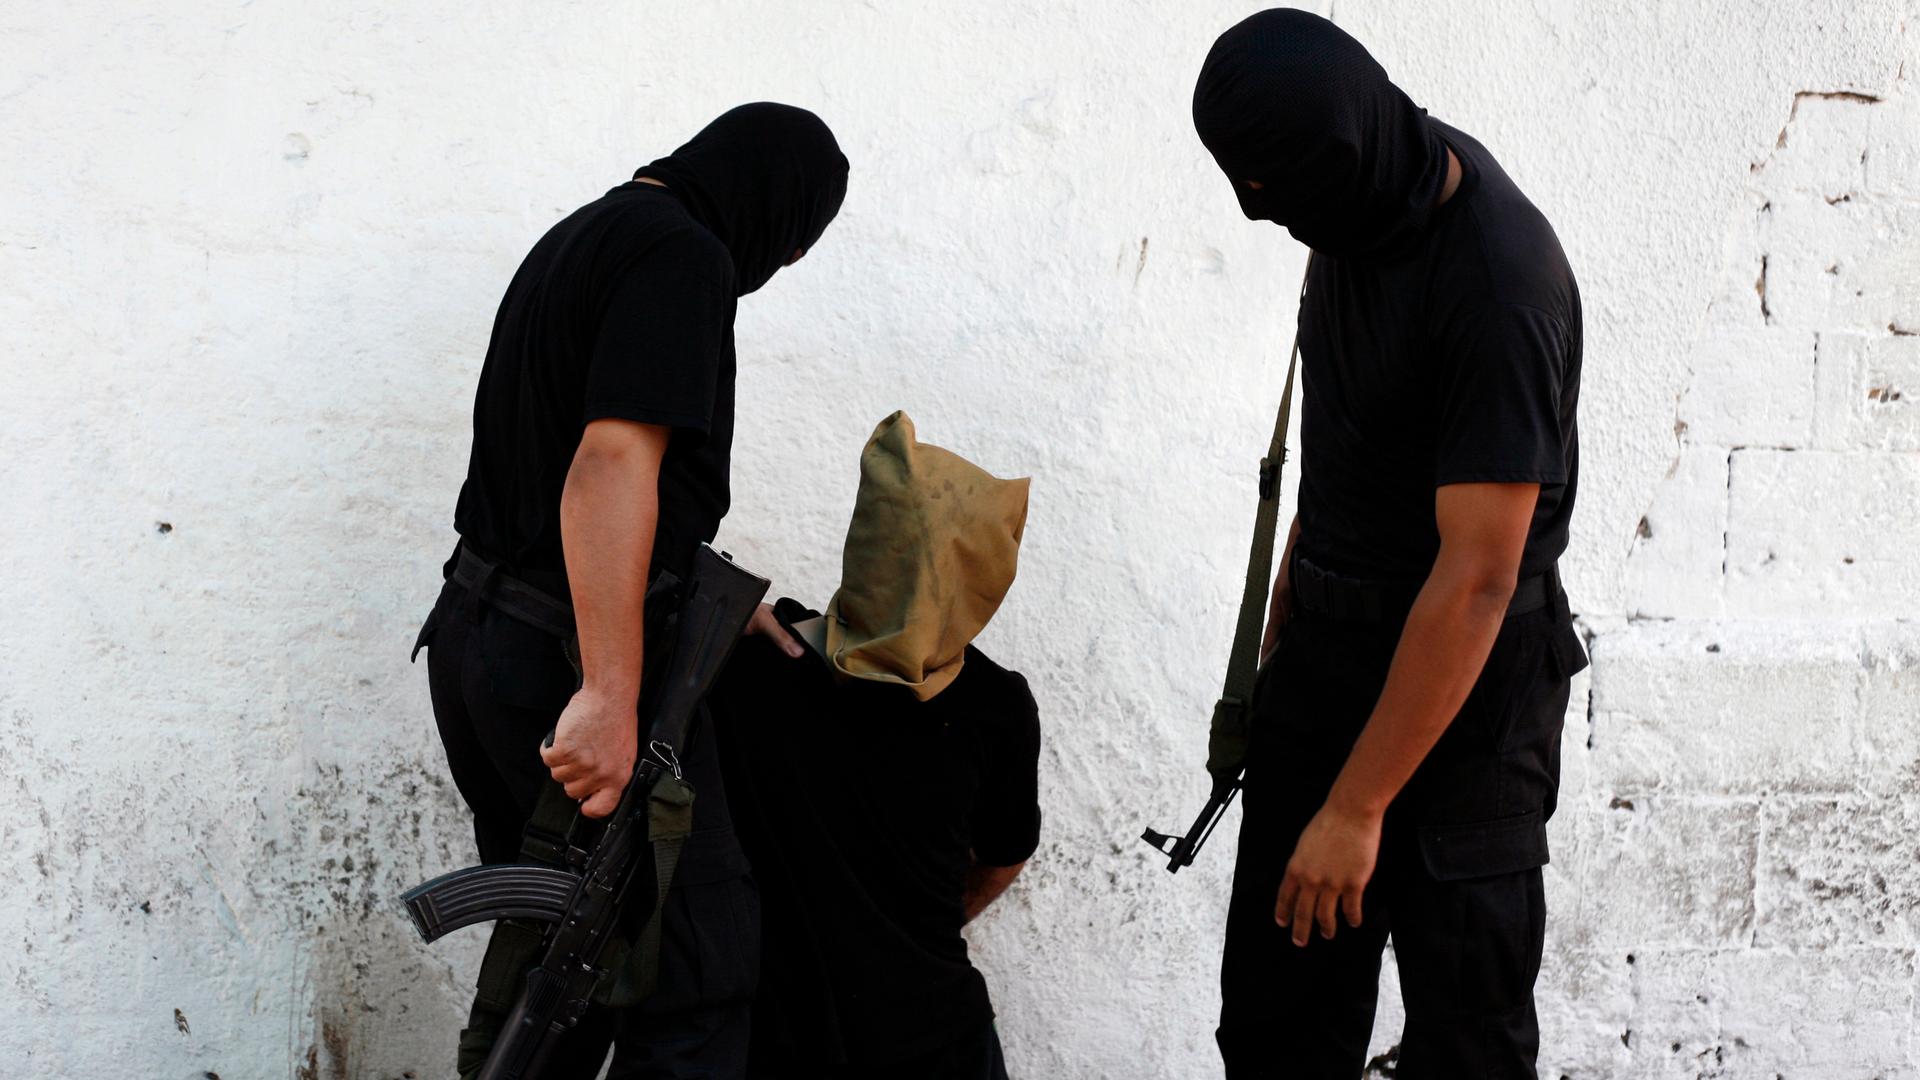 Hamas militants grab a Palestinian suspected of collaborating with Israel before being executed in Gaza City on August 22, 2014. Hamas militants killed seven Palestinians suspected of collaborating with Israel in a public execution in a central Gaza squar